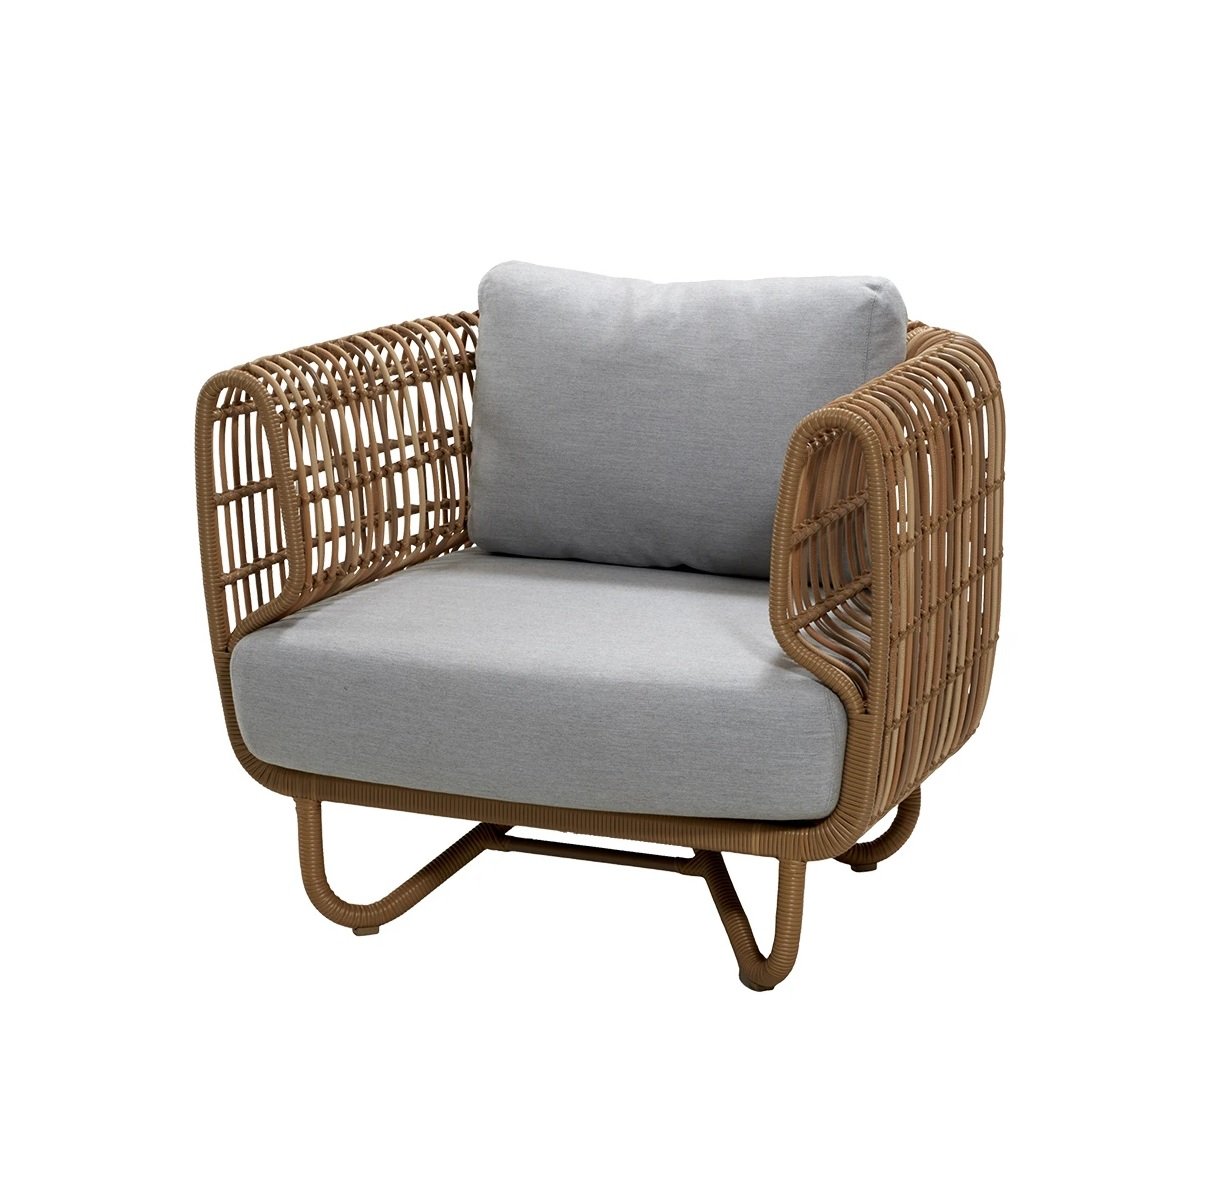 Nest Lounge Chair from Cane-line, designed by Foersom & Hiort-Lorenzen MDD